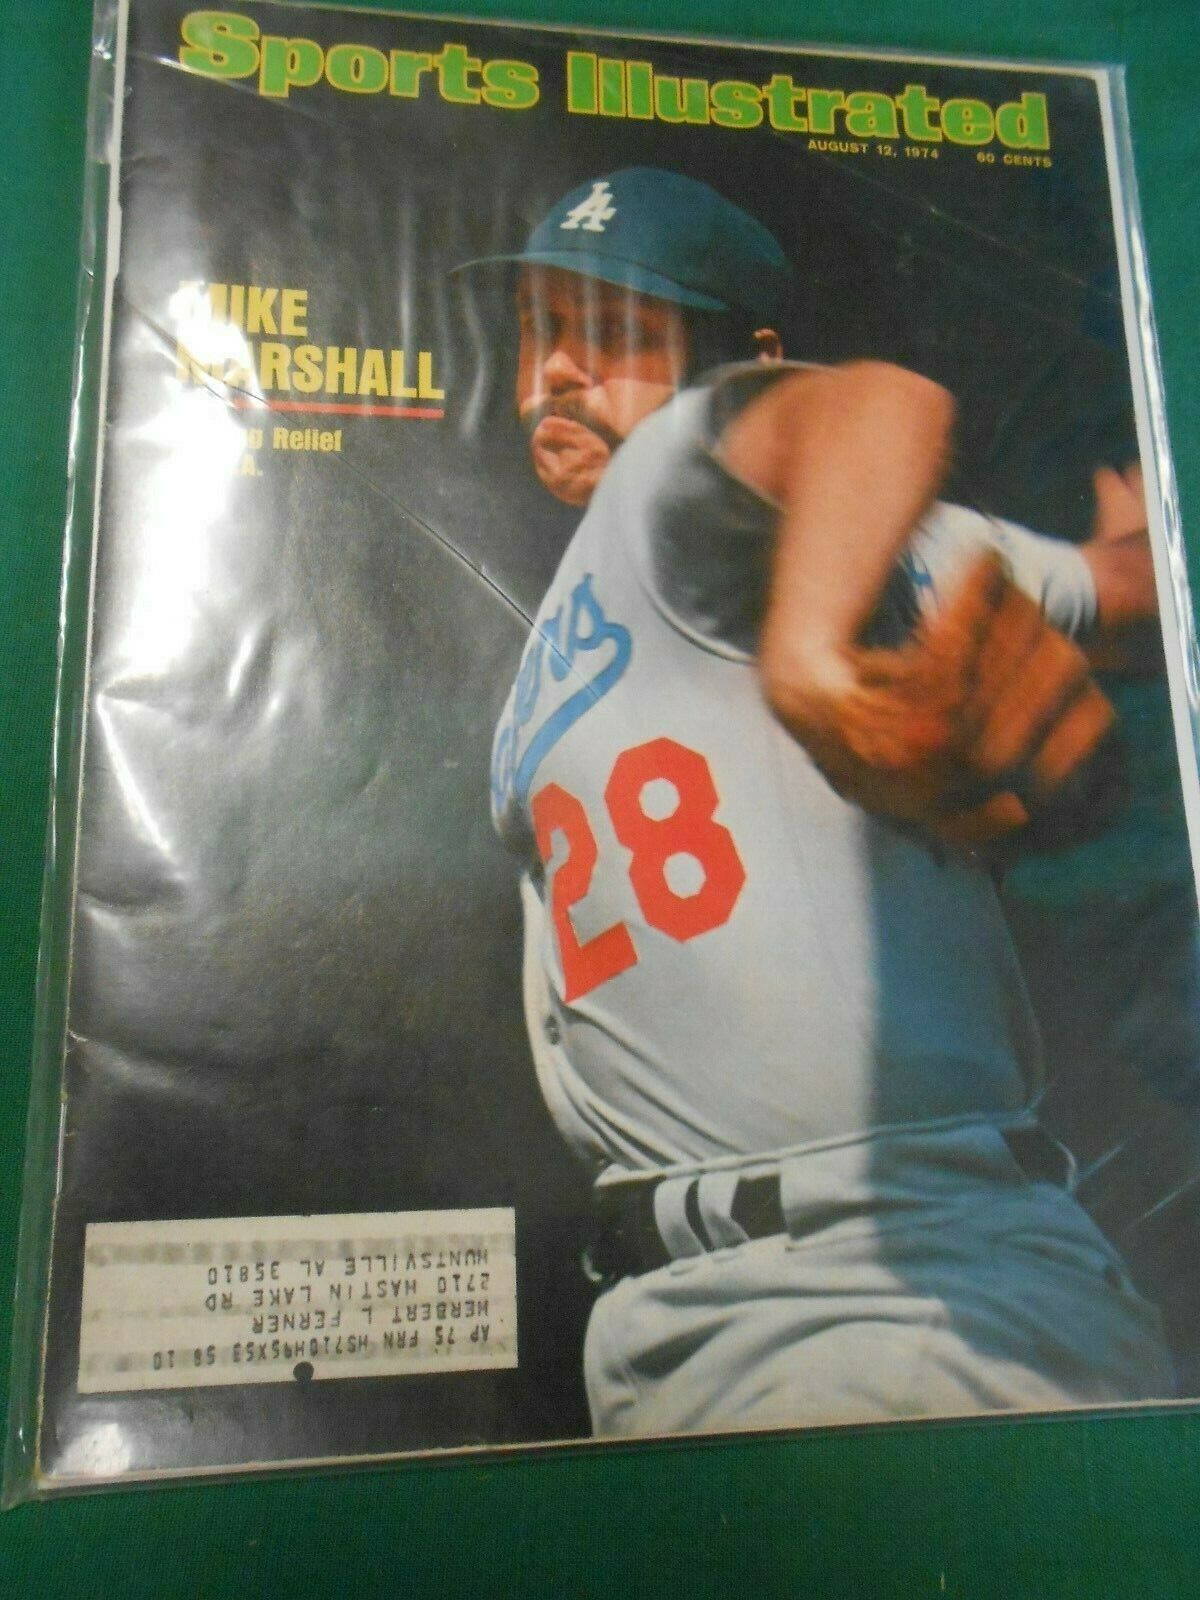 Primary image for SPORTS ILLUSTRATED Aug 12,1974 DODGERS...MIKE MARSHALL.......FREE POSTAGE USA